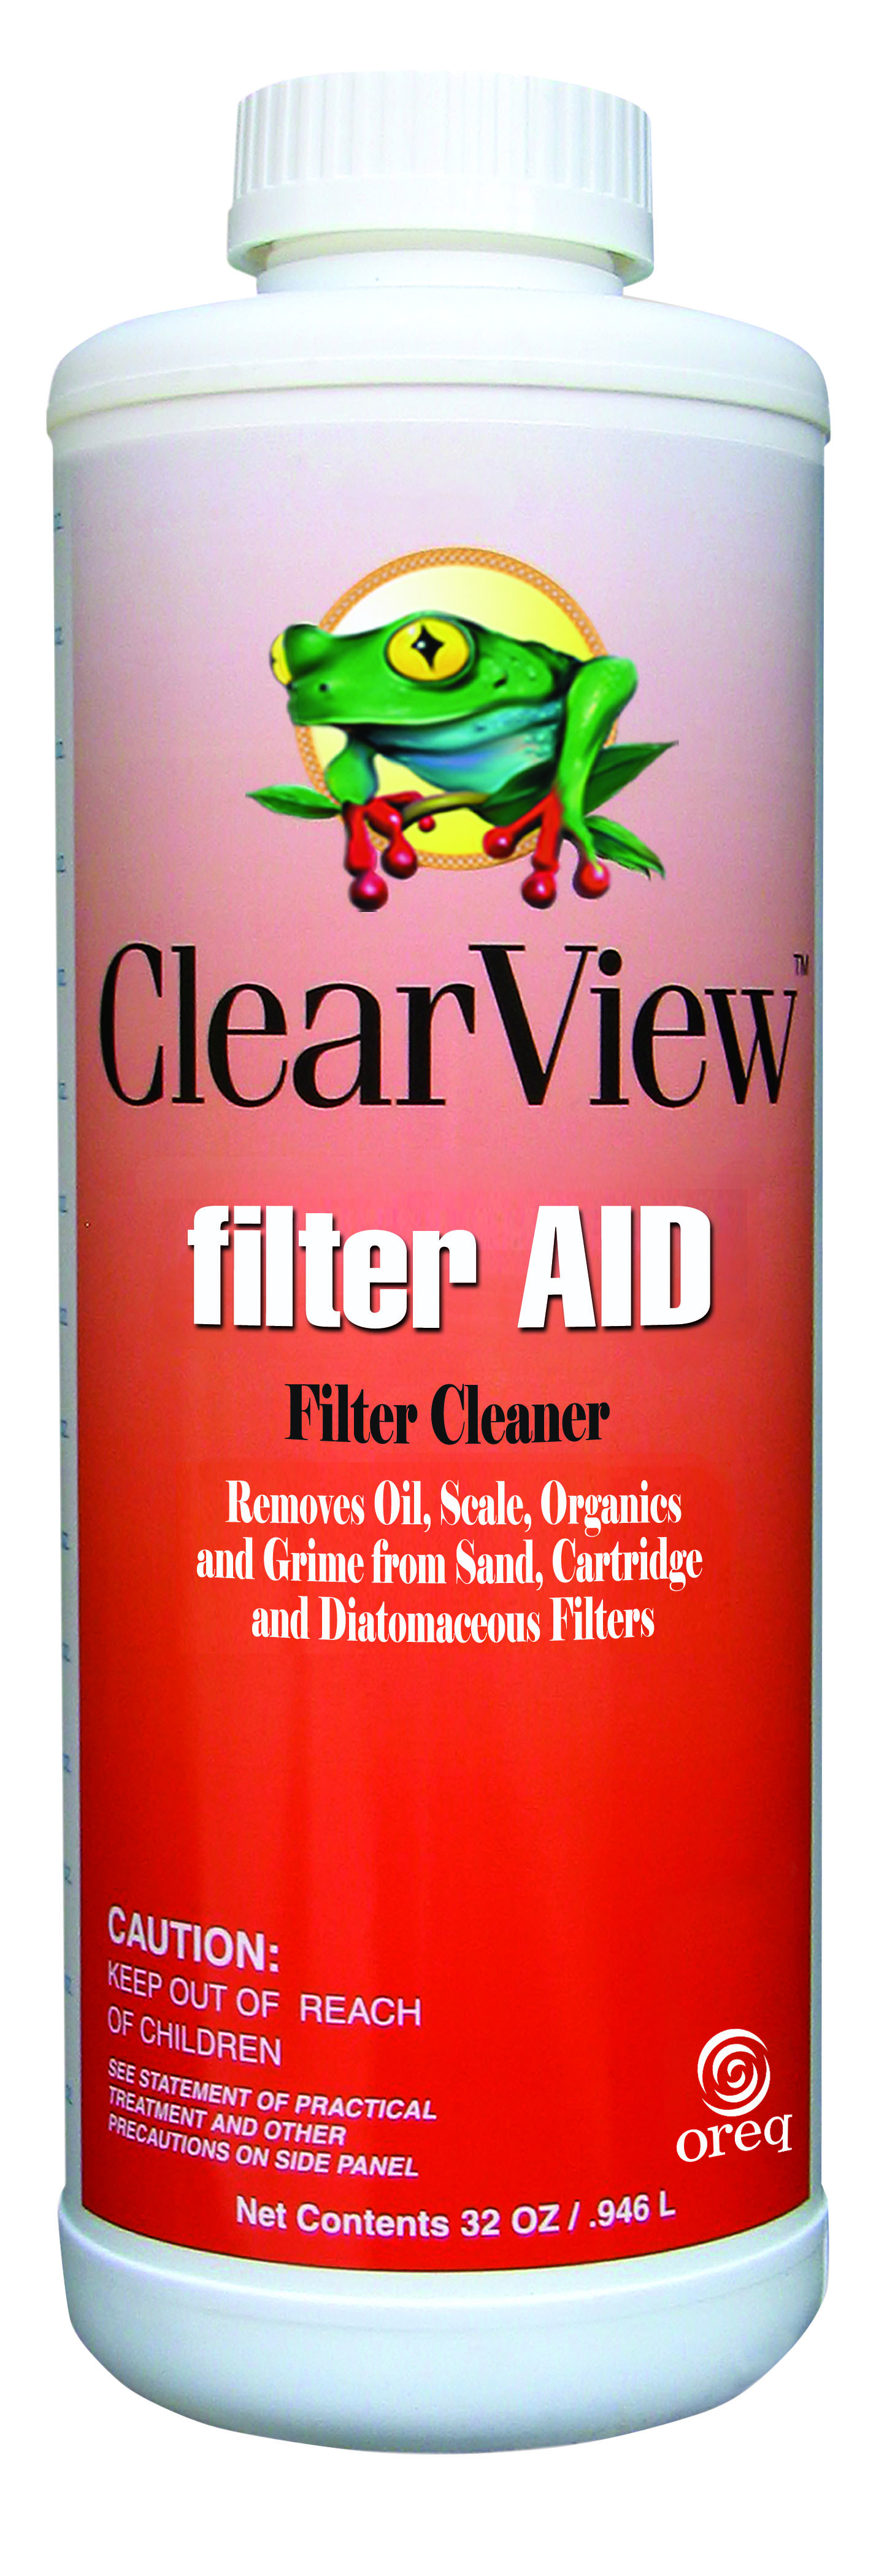 Clearview Filter Aid 12 X1 qt/cs - LINERS